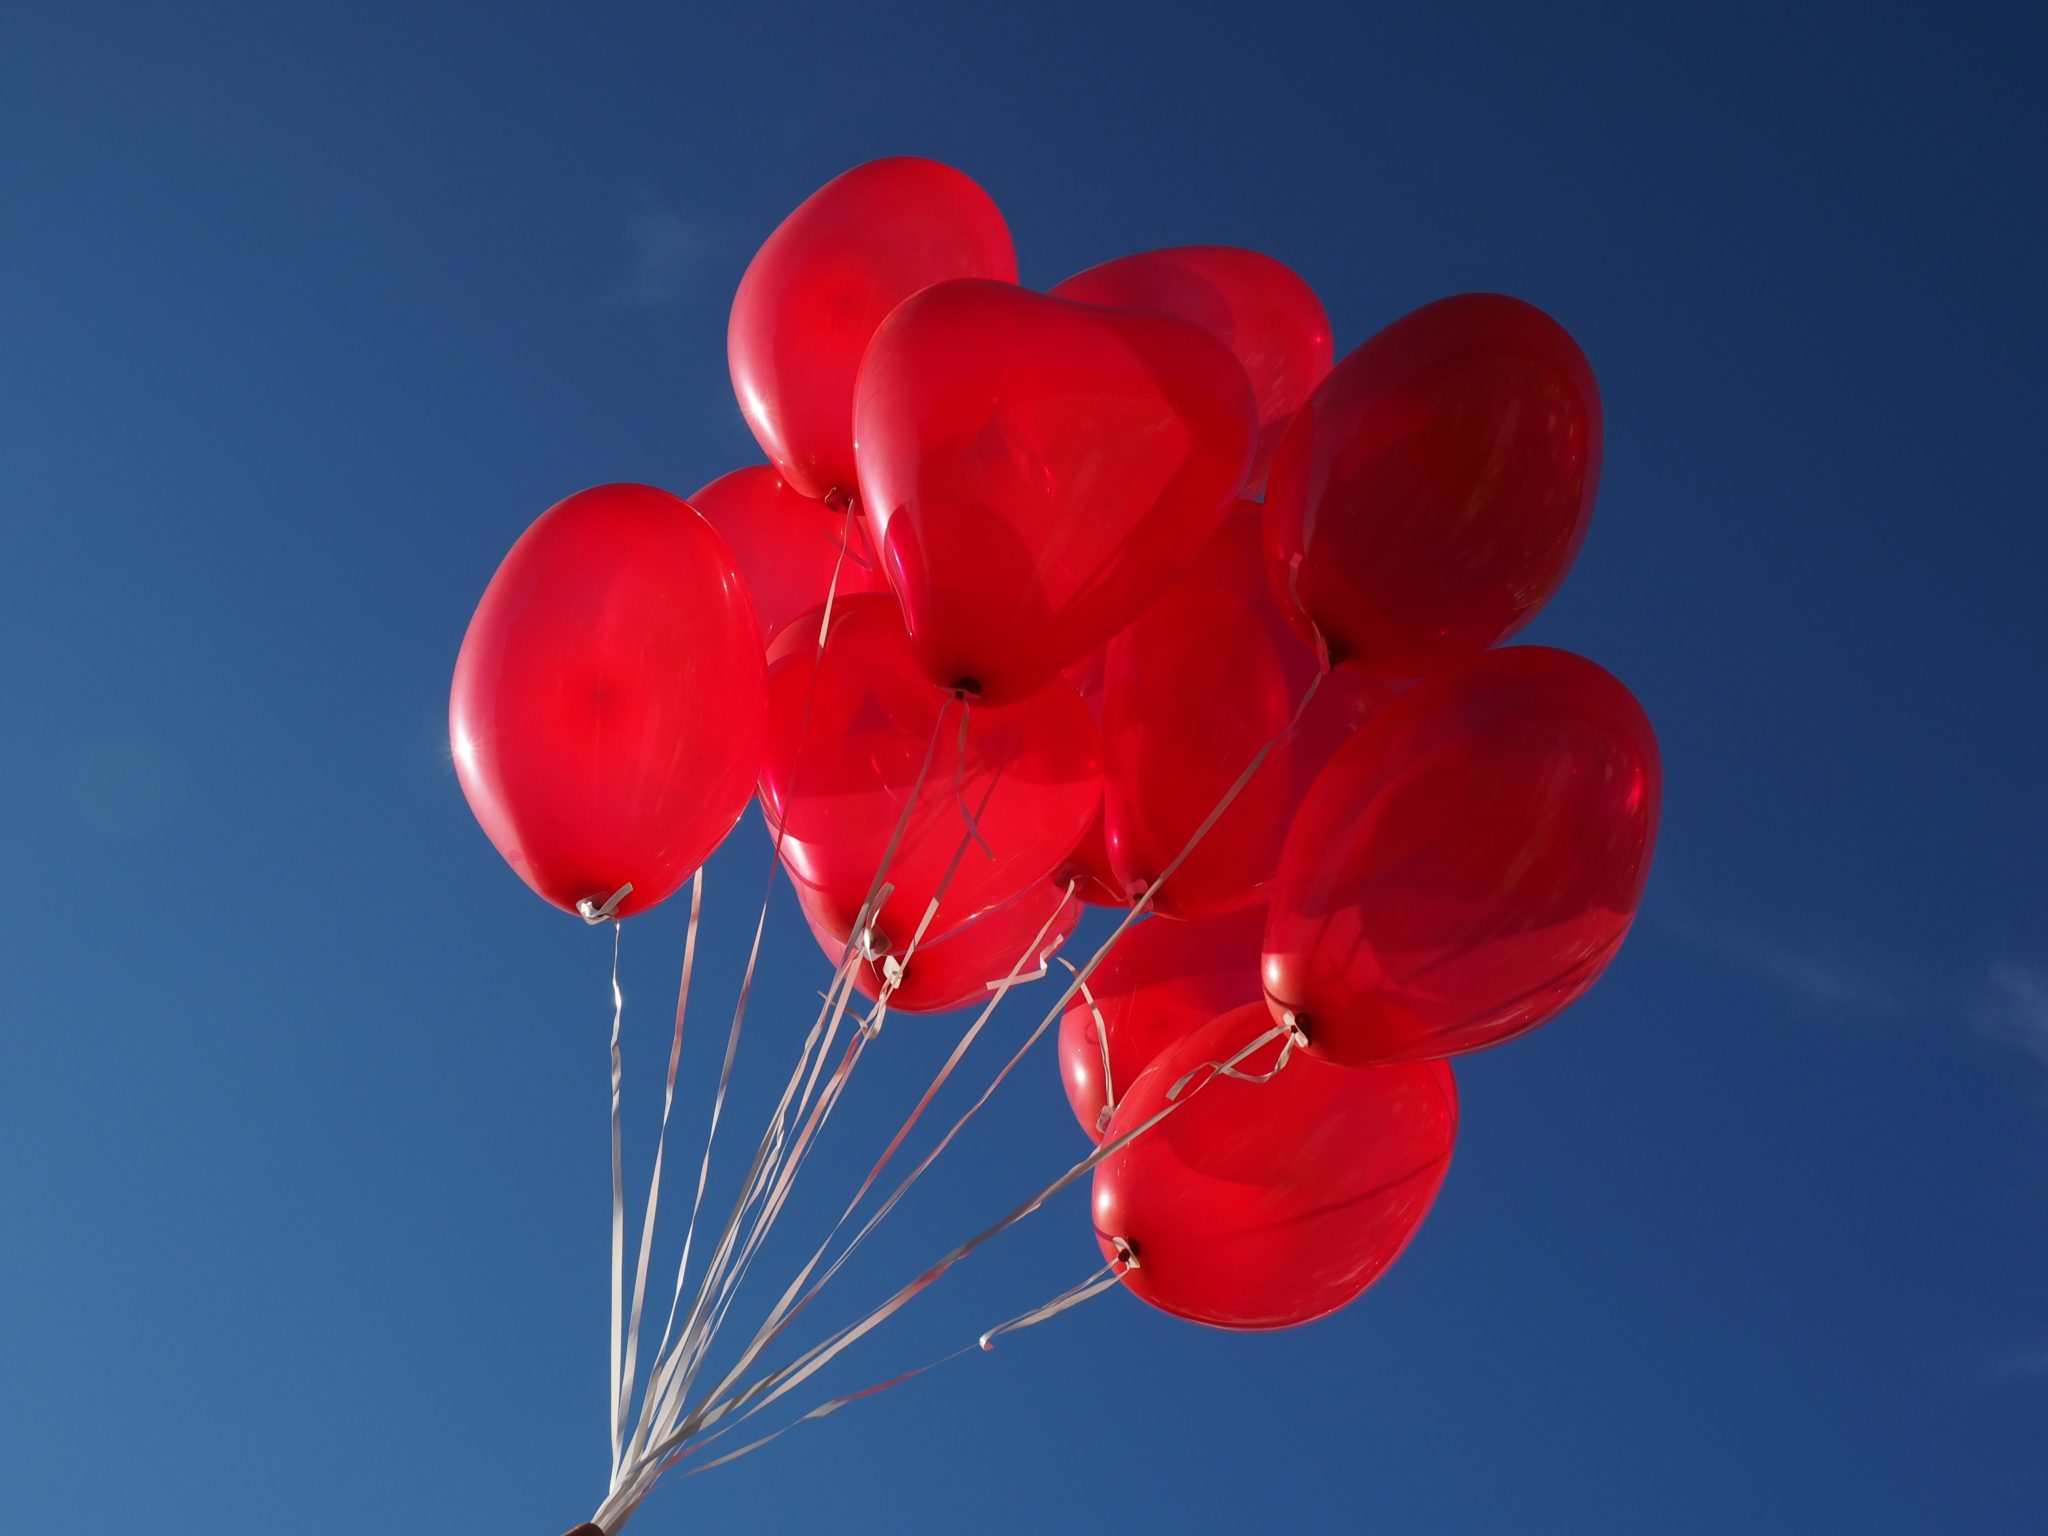 Red balloons in the blue sky